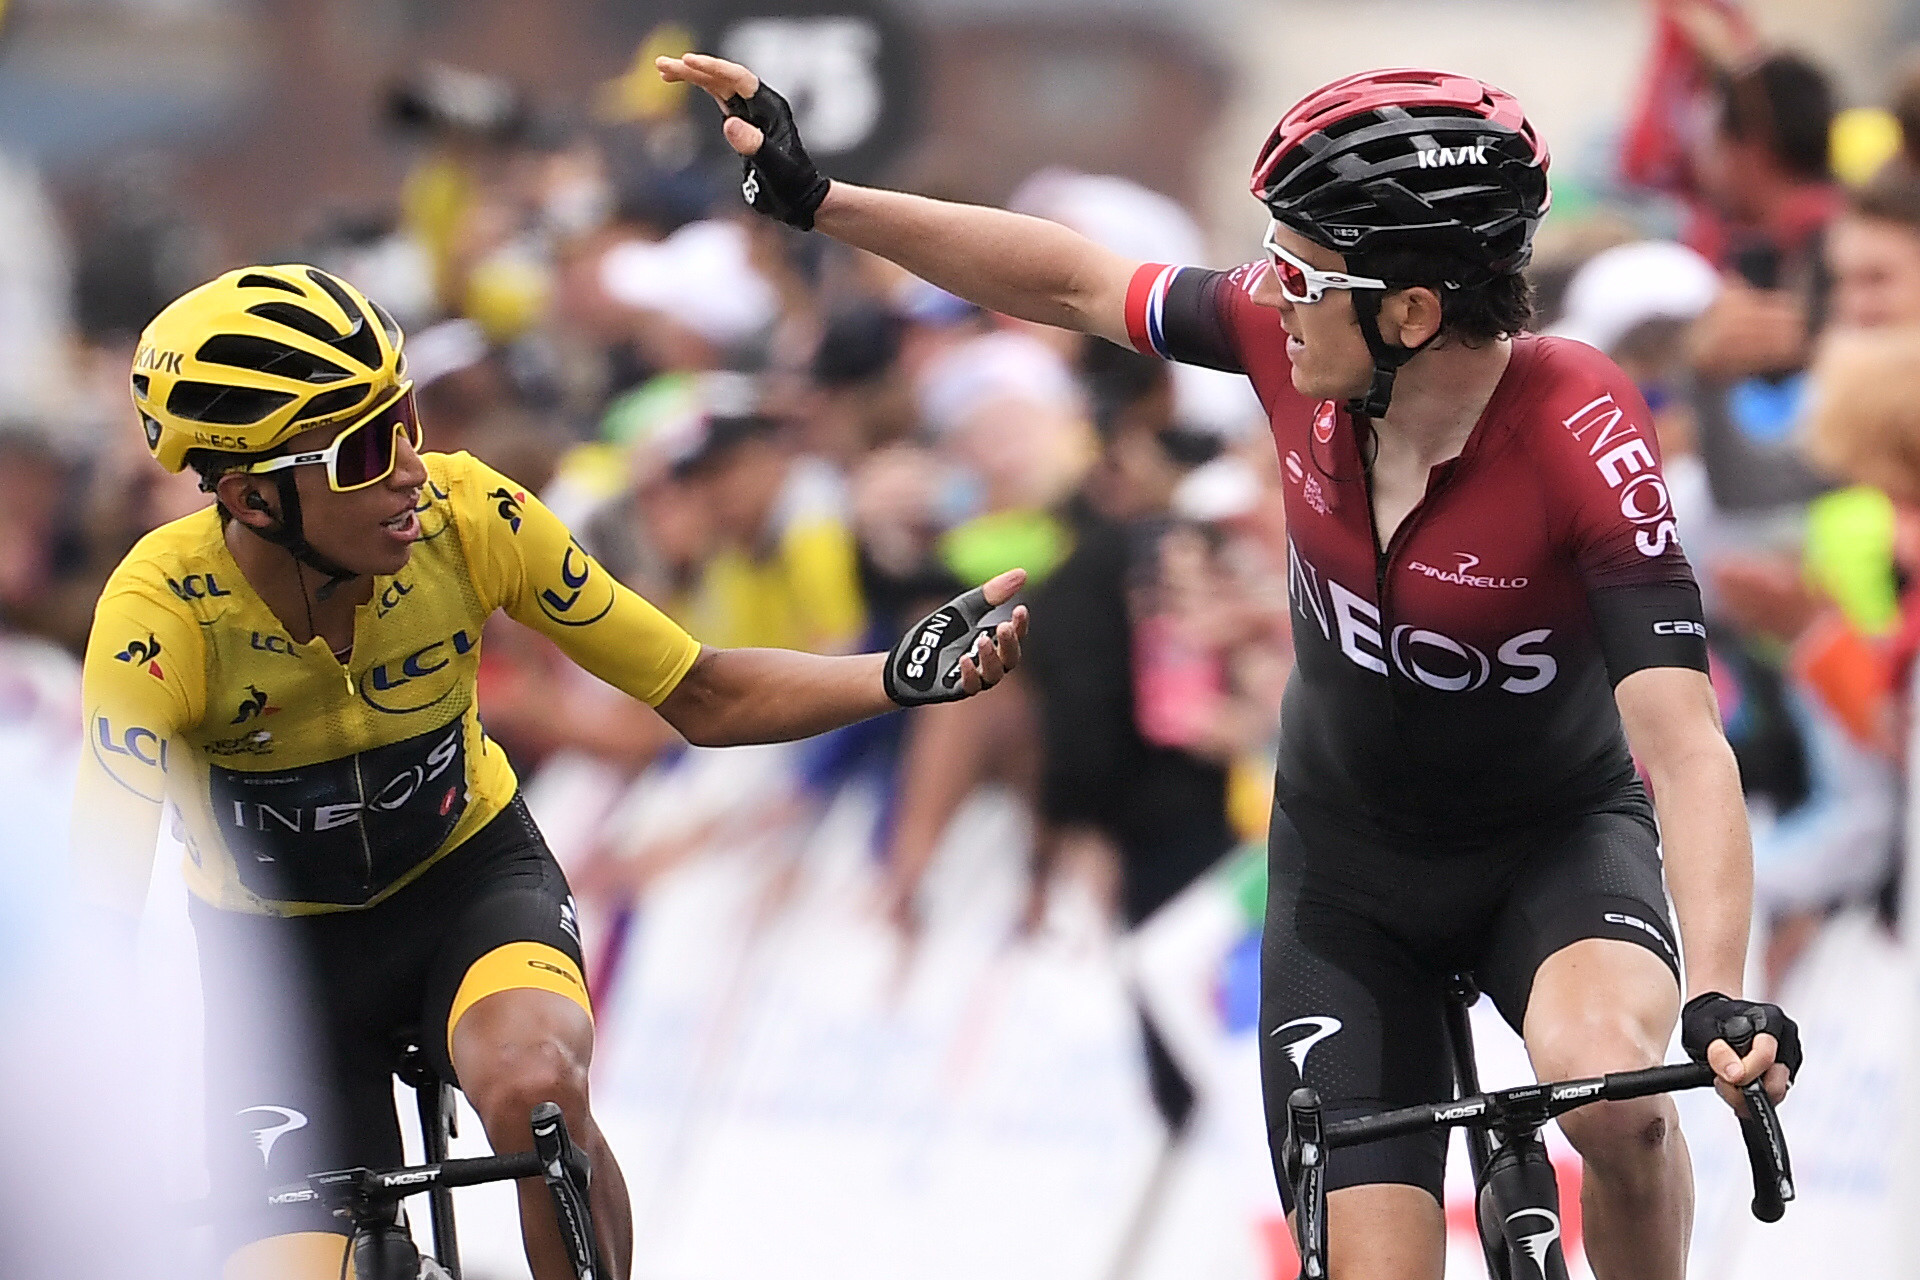 Bernal set to become first Colombian Tour de France winner after retaining lead